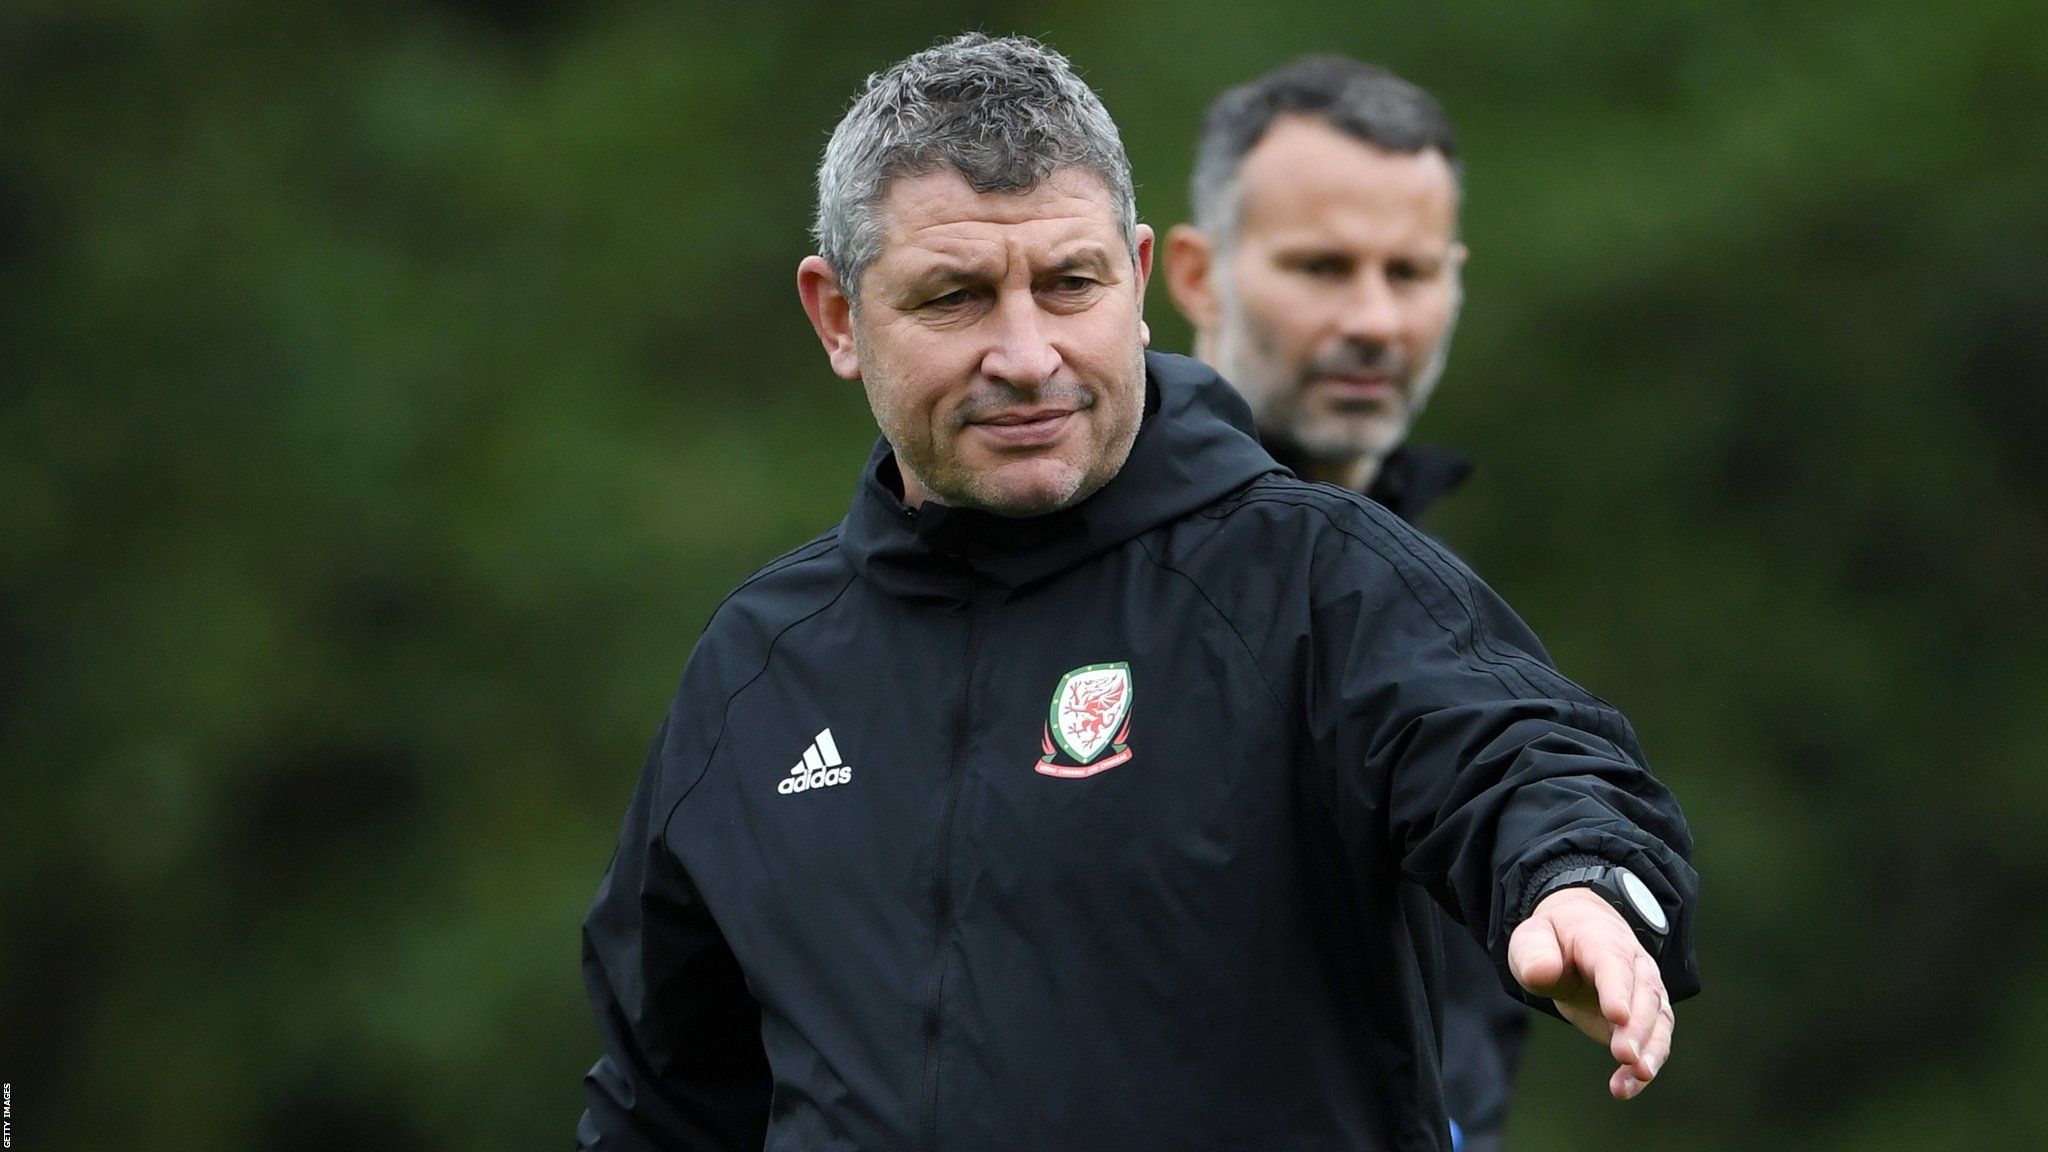 Osian Roberts with Wales manager Ryan Giggs in the background